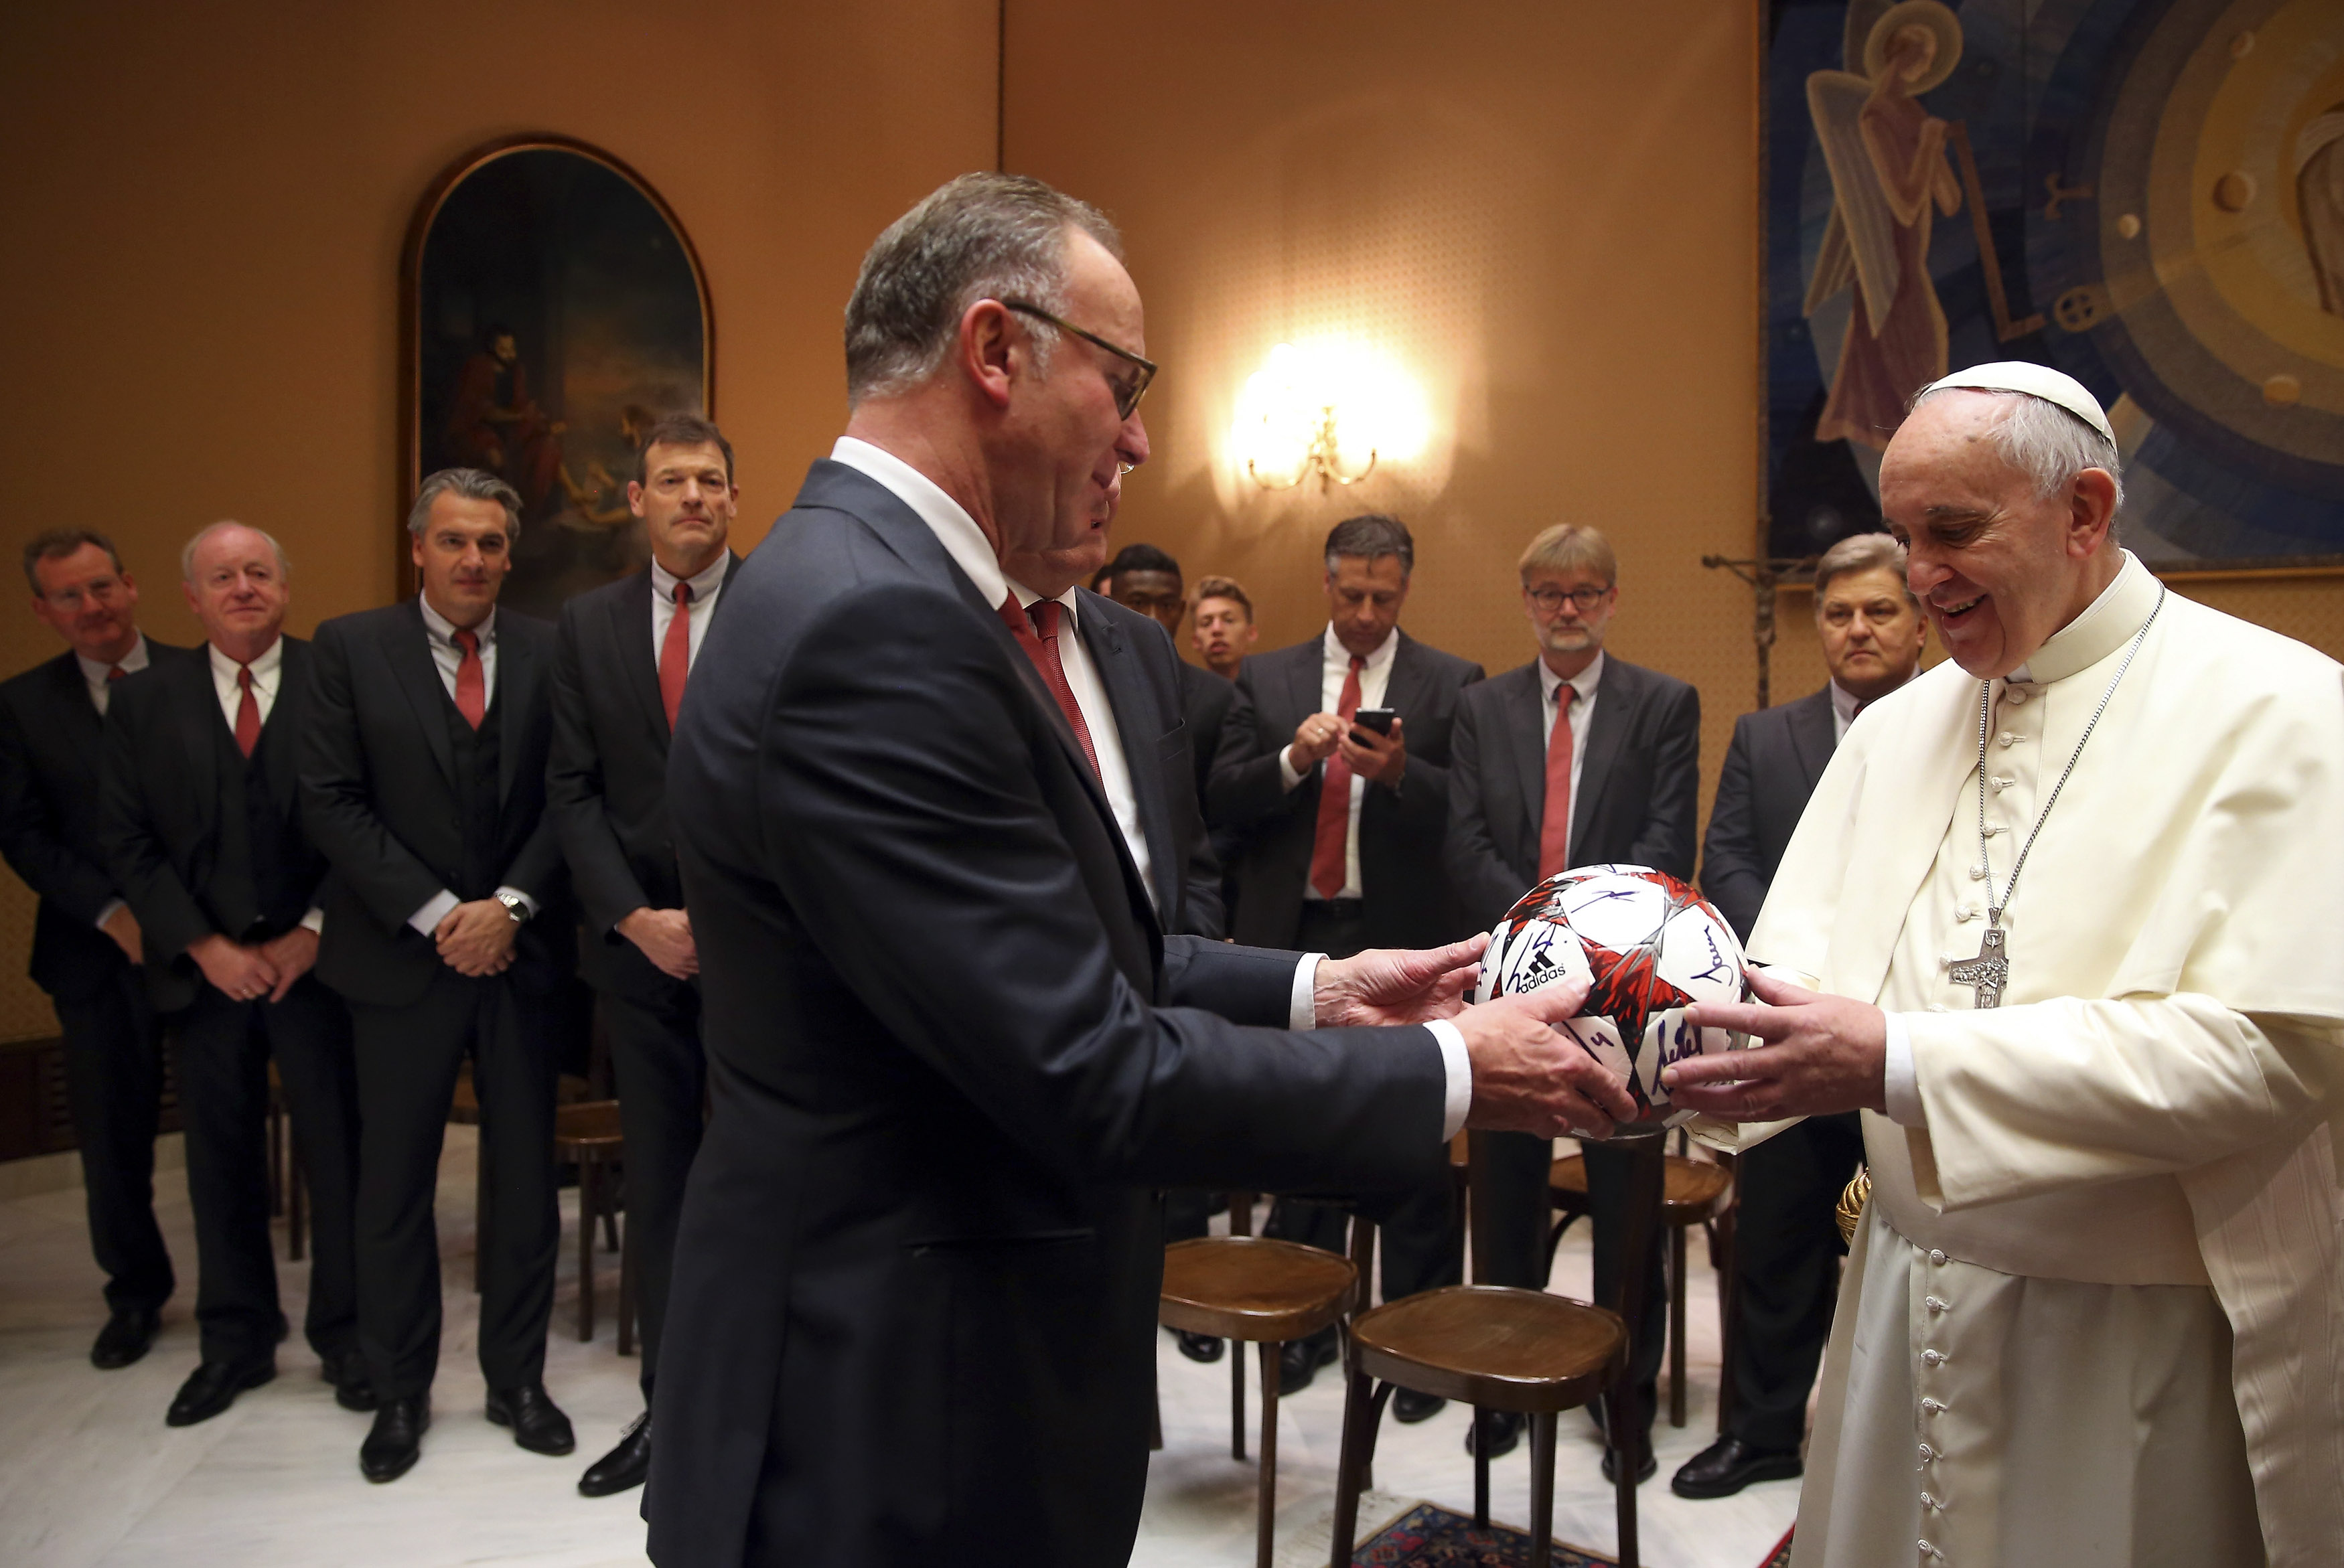 Pope Francis receives an autographed fottball from Bayern Munich's CEO Karlheinz Rummenigge during a private audience with the soccer team at the Palace of the Vatican in Vatican City, October 22, 2014. REUTERS/Alexander Hassenstein/Pool (VATICAN - Tags: SPORT SOCCER RELIGION) - RTR4B4TZ